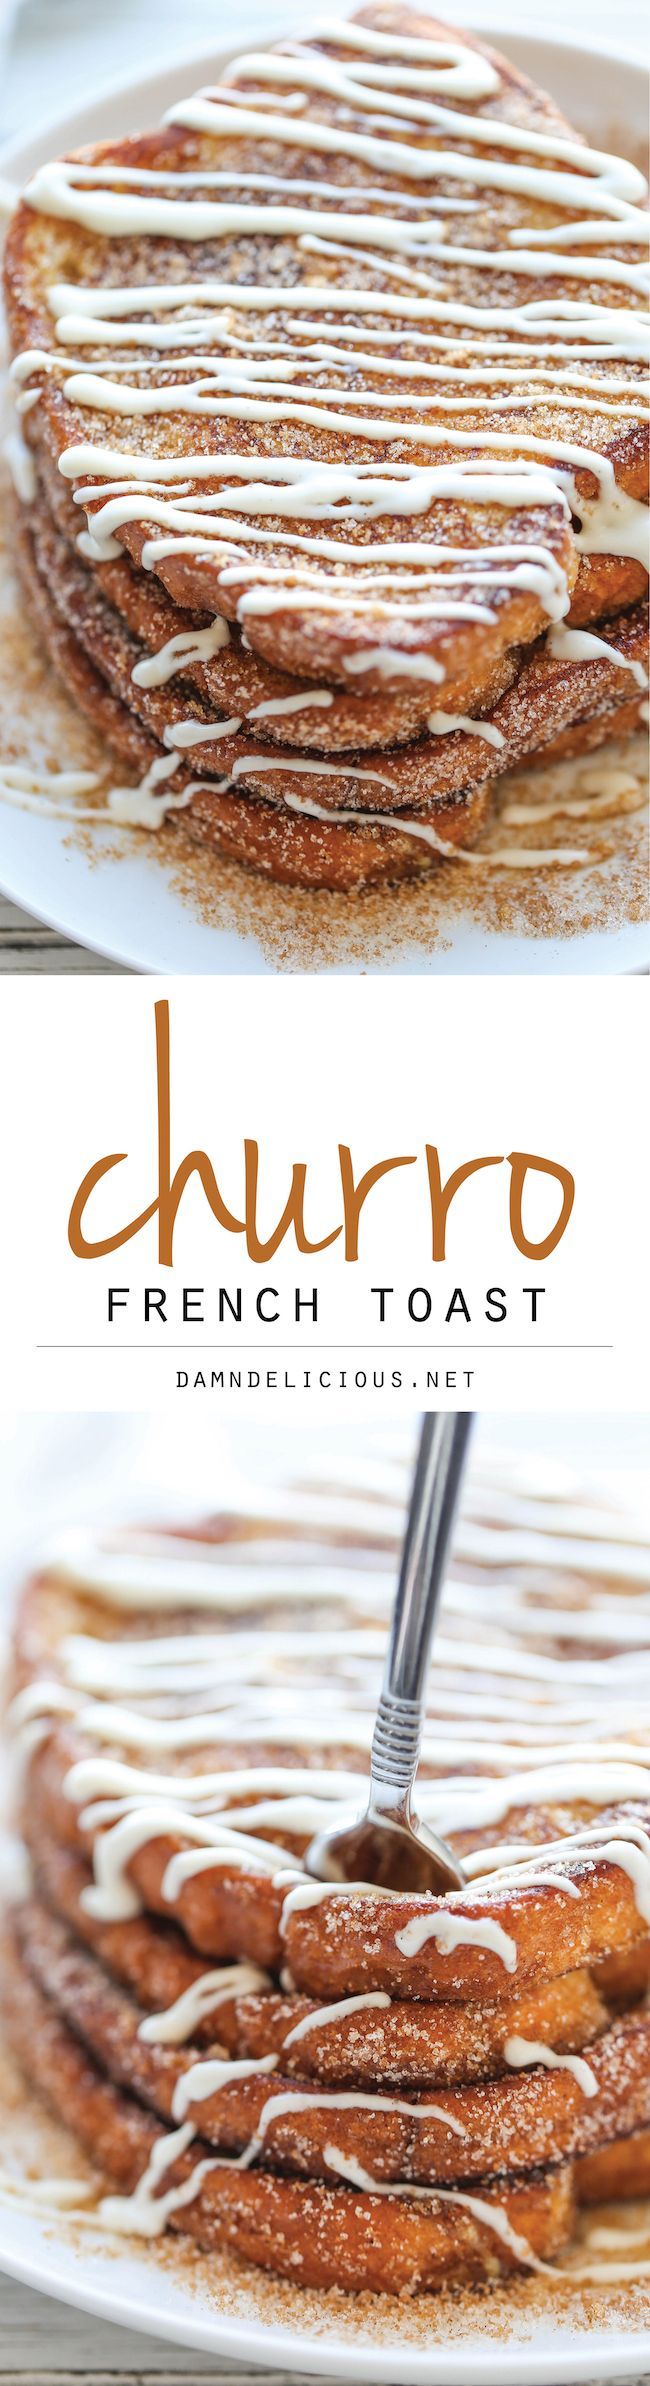 Churro French Toast – The most amazing, most buttery French toast you will ever have, coated in cinnamon sugar and drizzled with